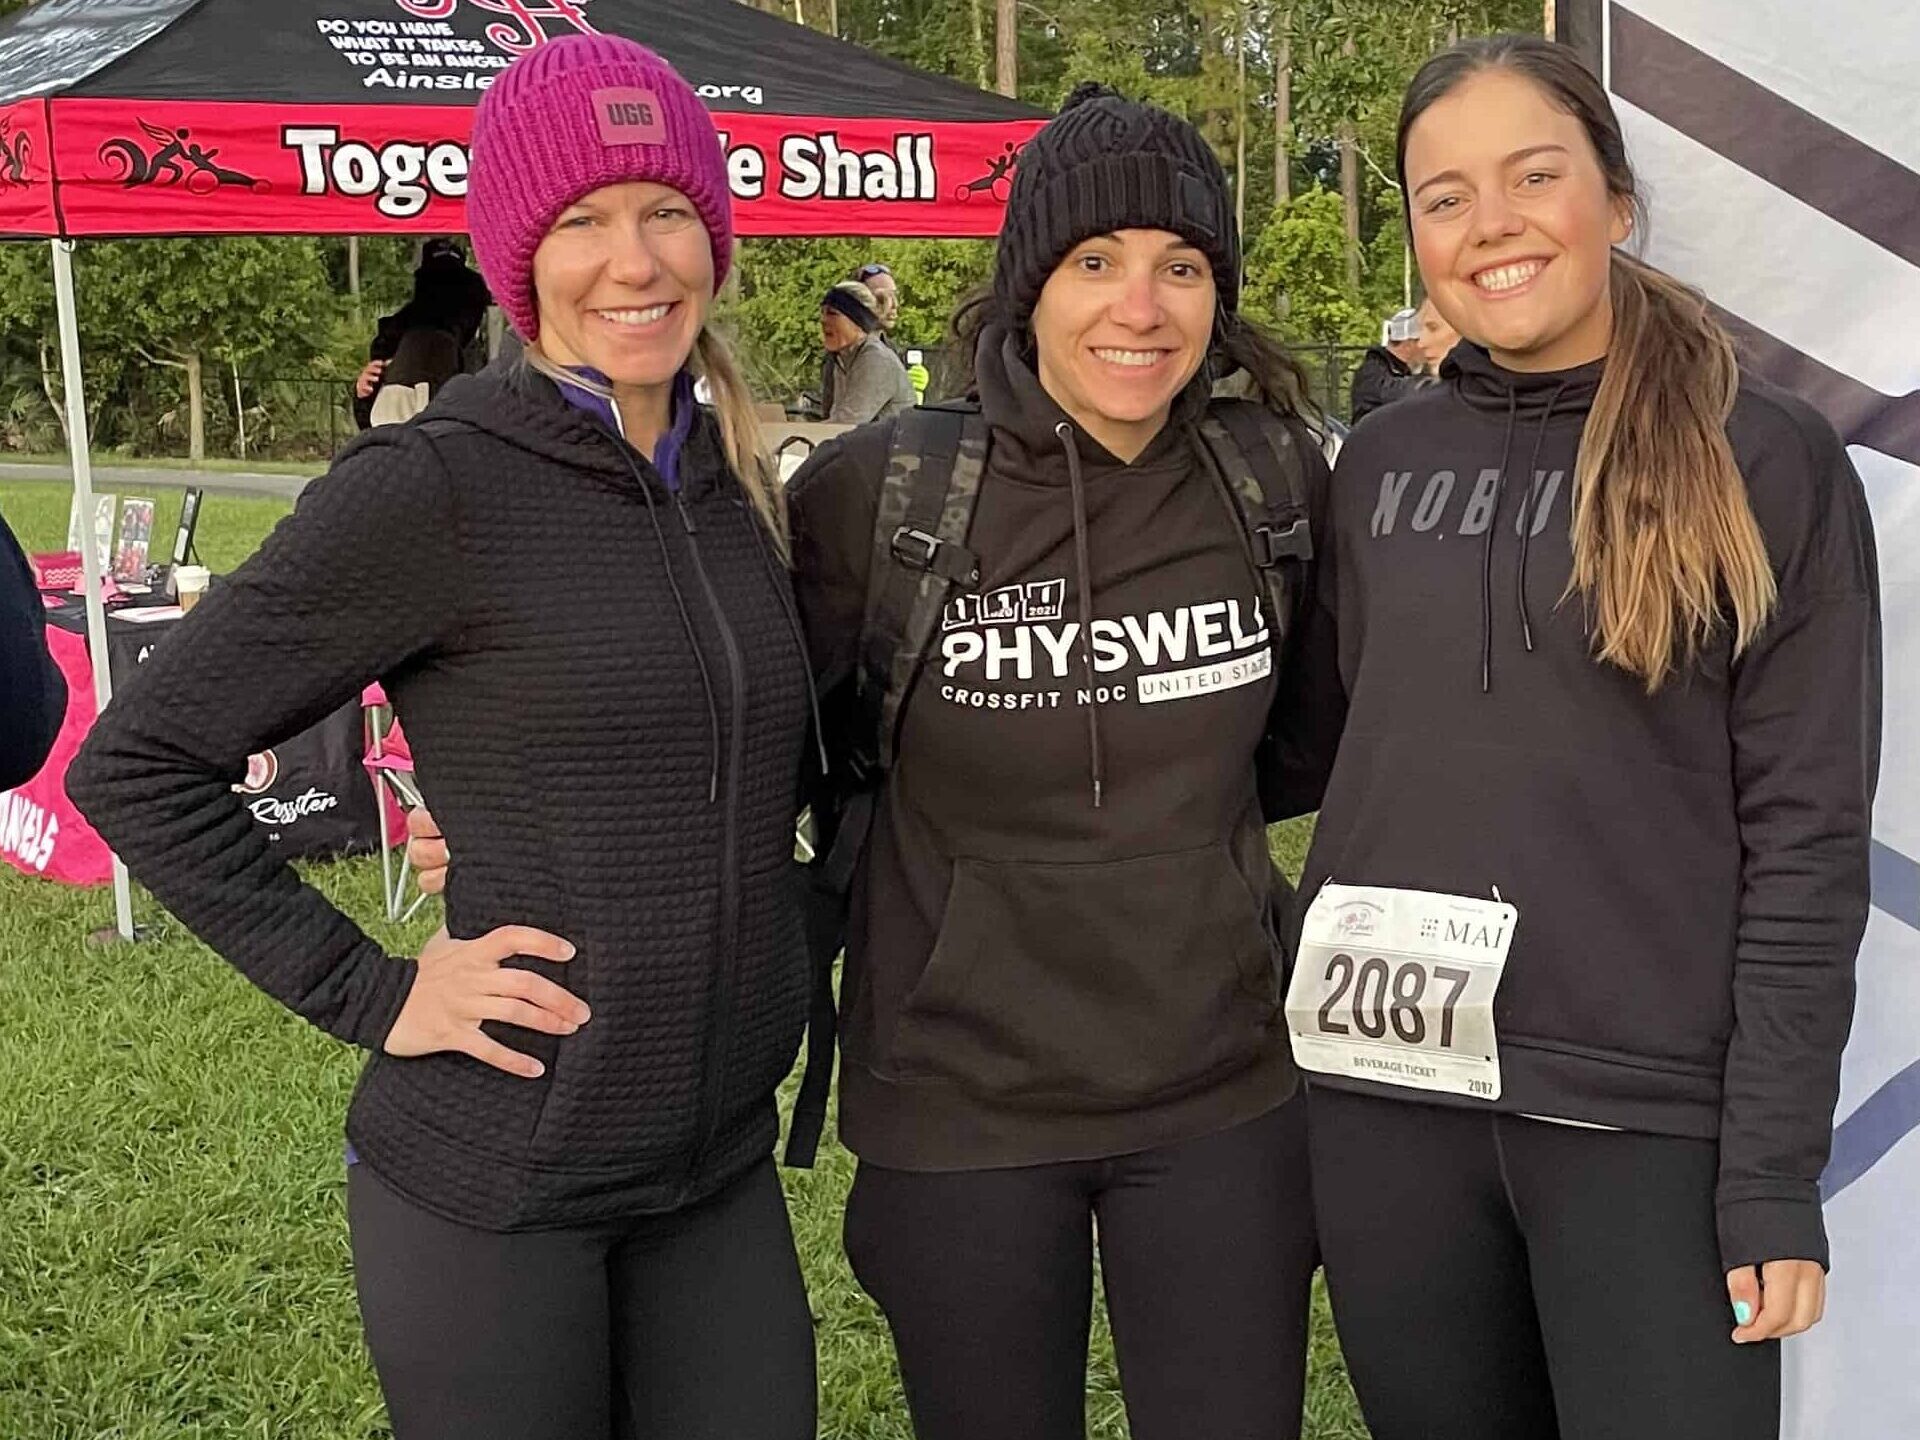 Three Floyd Lee employees participate in the Apryle Showers Run/Ruck